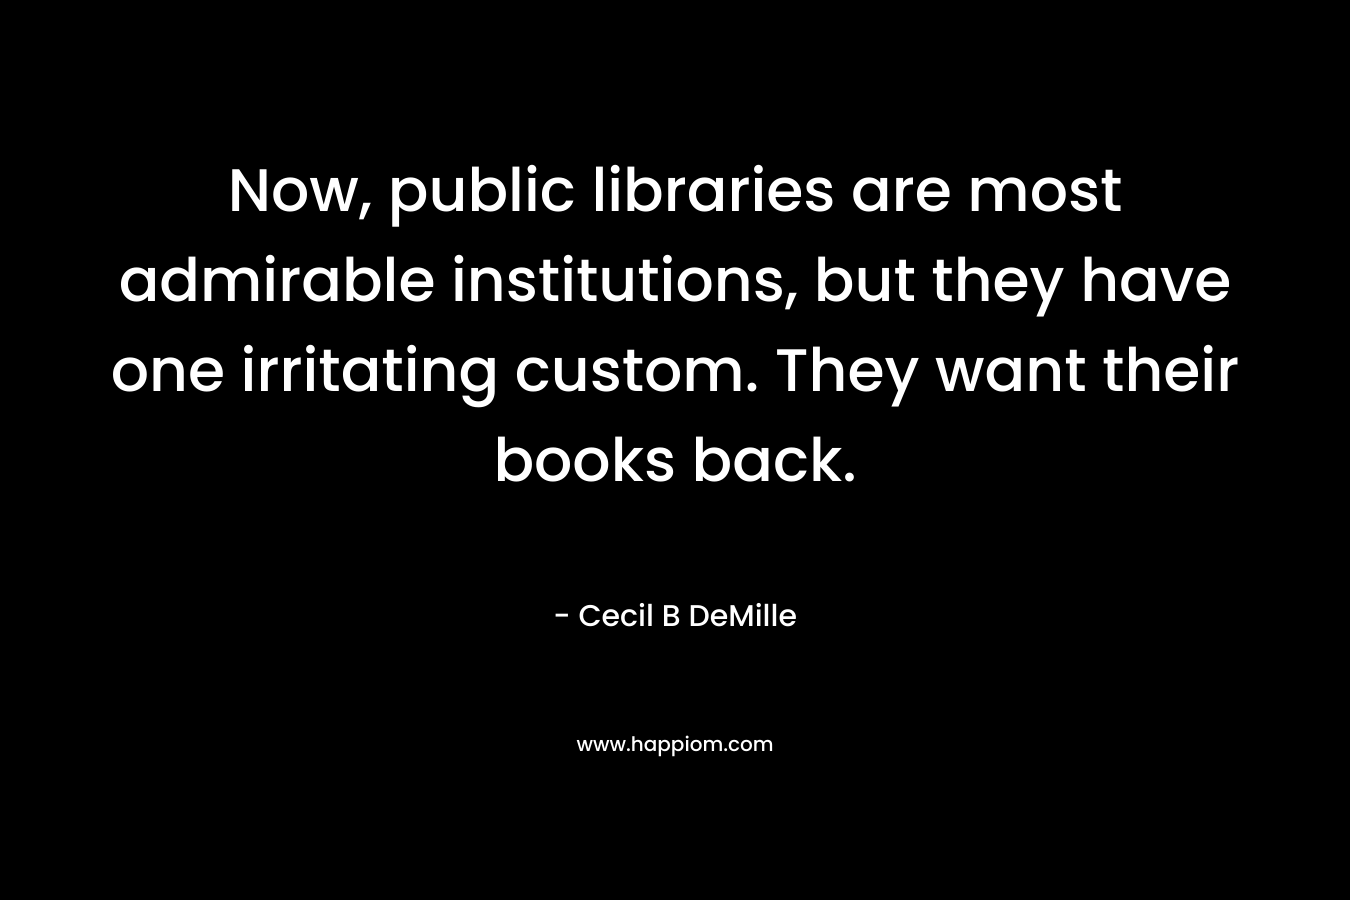 Now, public libraries are most admirable institutions, but they have one irritating custom. They want their books back.